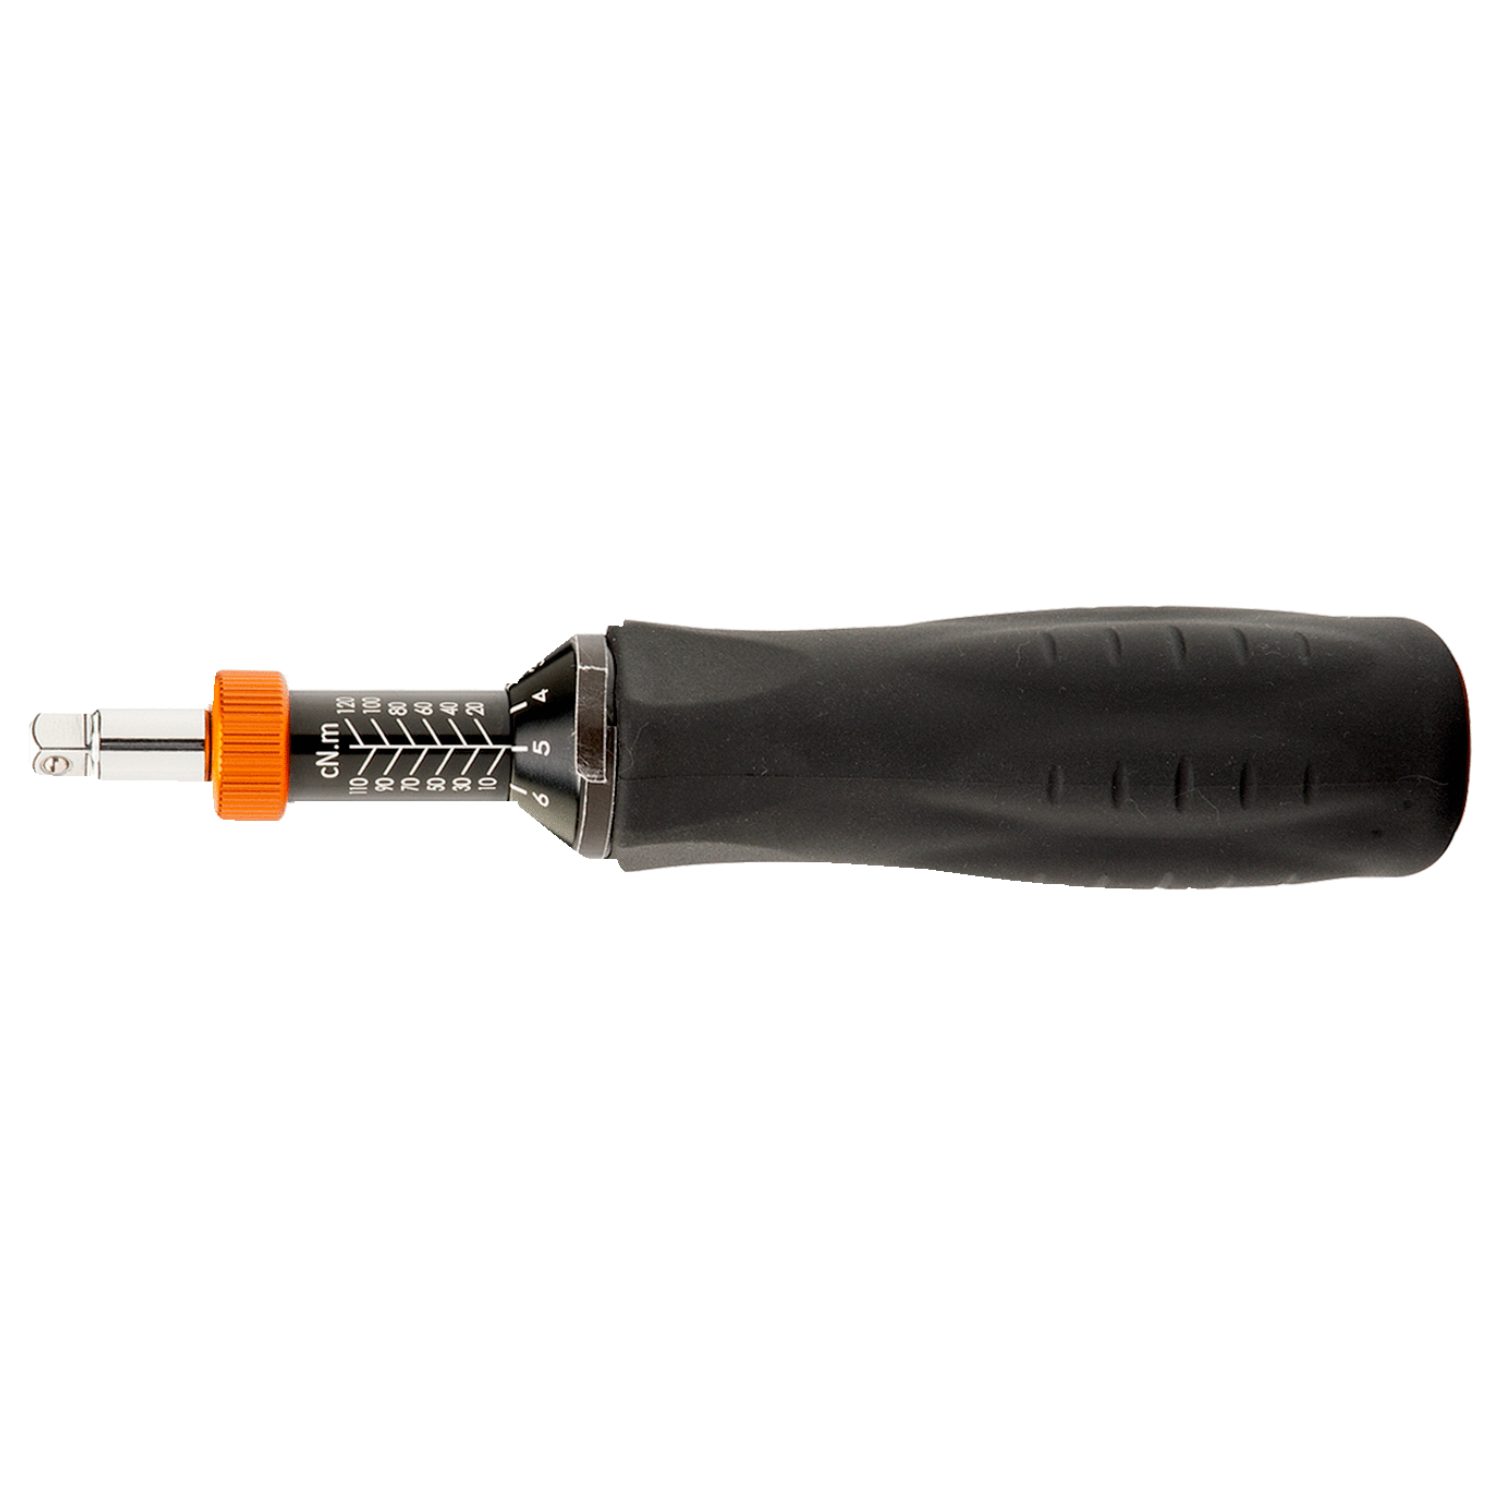 BAHCO TSS120 Adjustable Torque Screwdriver with Marked Scale - Premium Adjustable Torque from BAHCO - Shop now at Yew Aik.